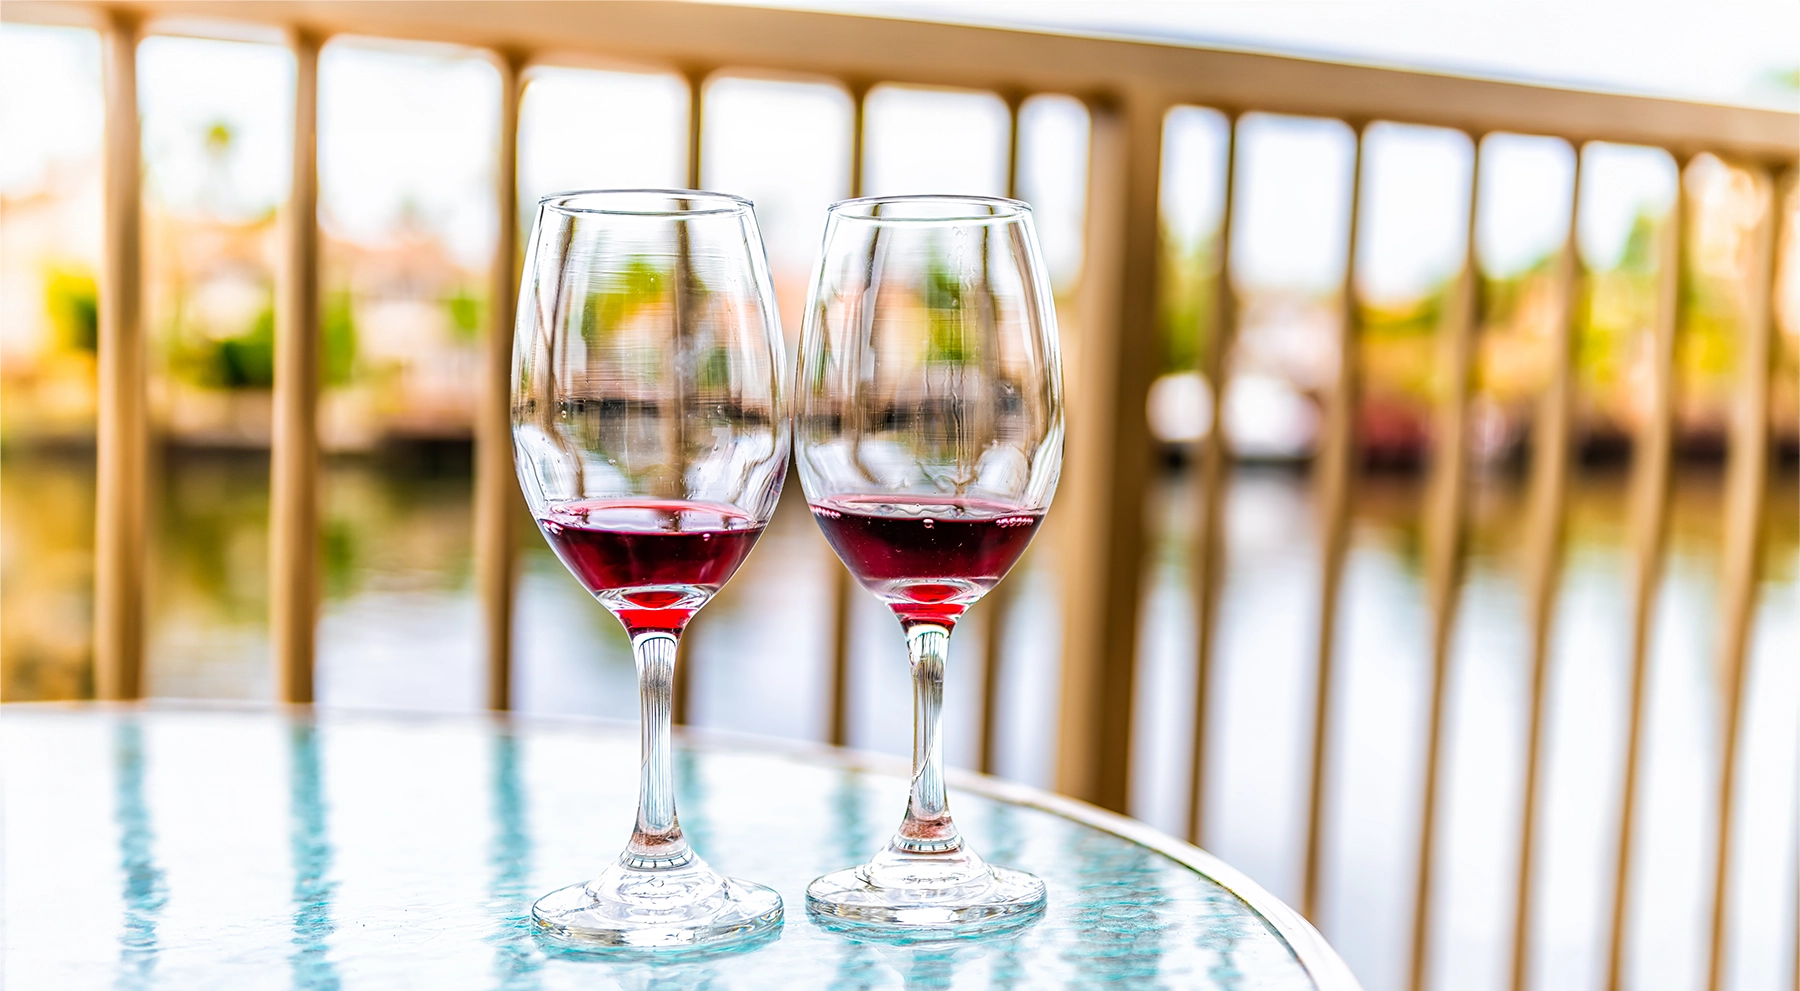 Two glasses of red wine sit on a patio table in Miami.